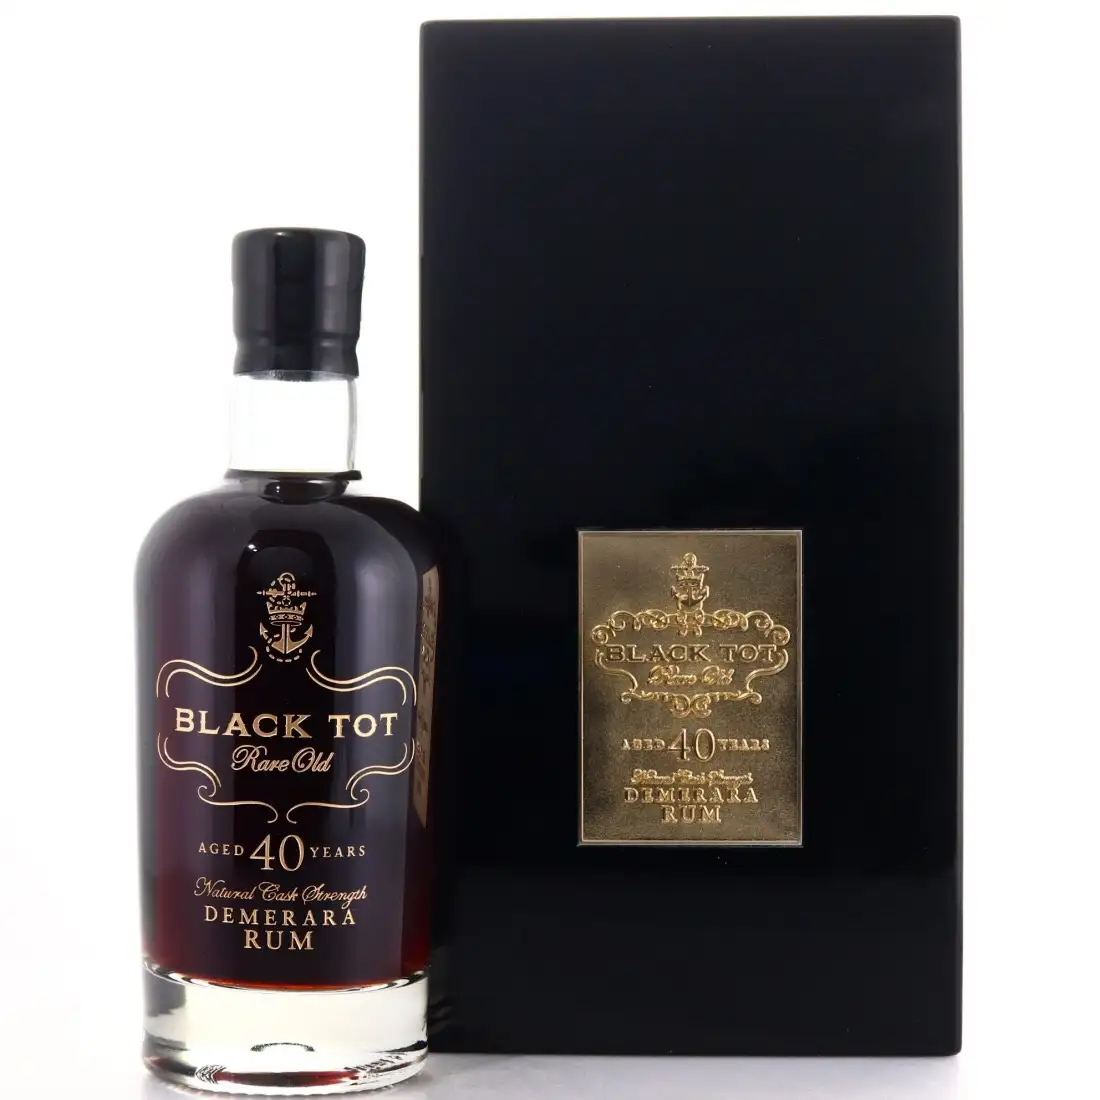 Image of the front of the bottle of the rum Black Tot Rum Demerara Aged 40 Years